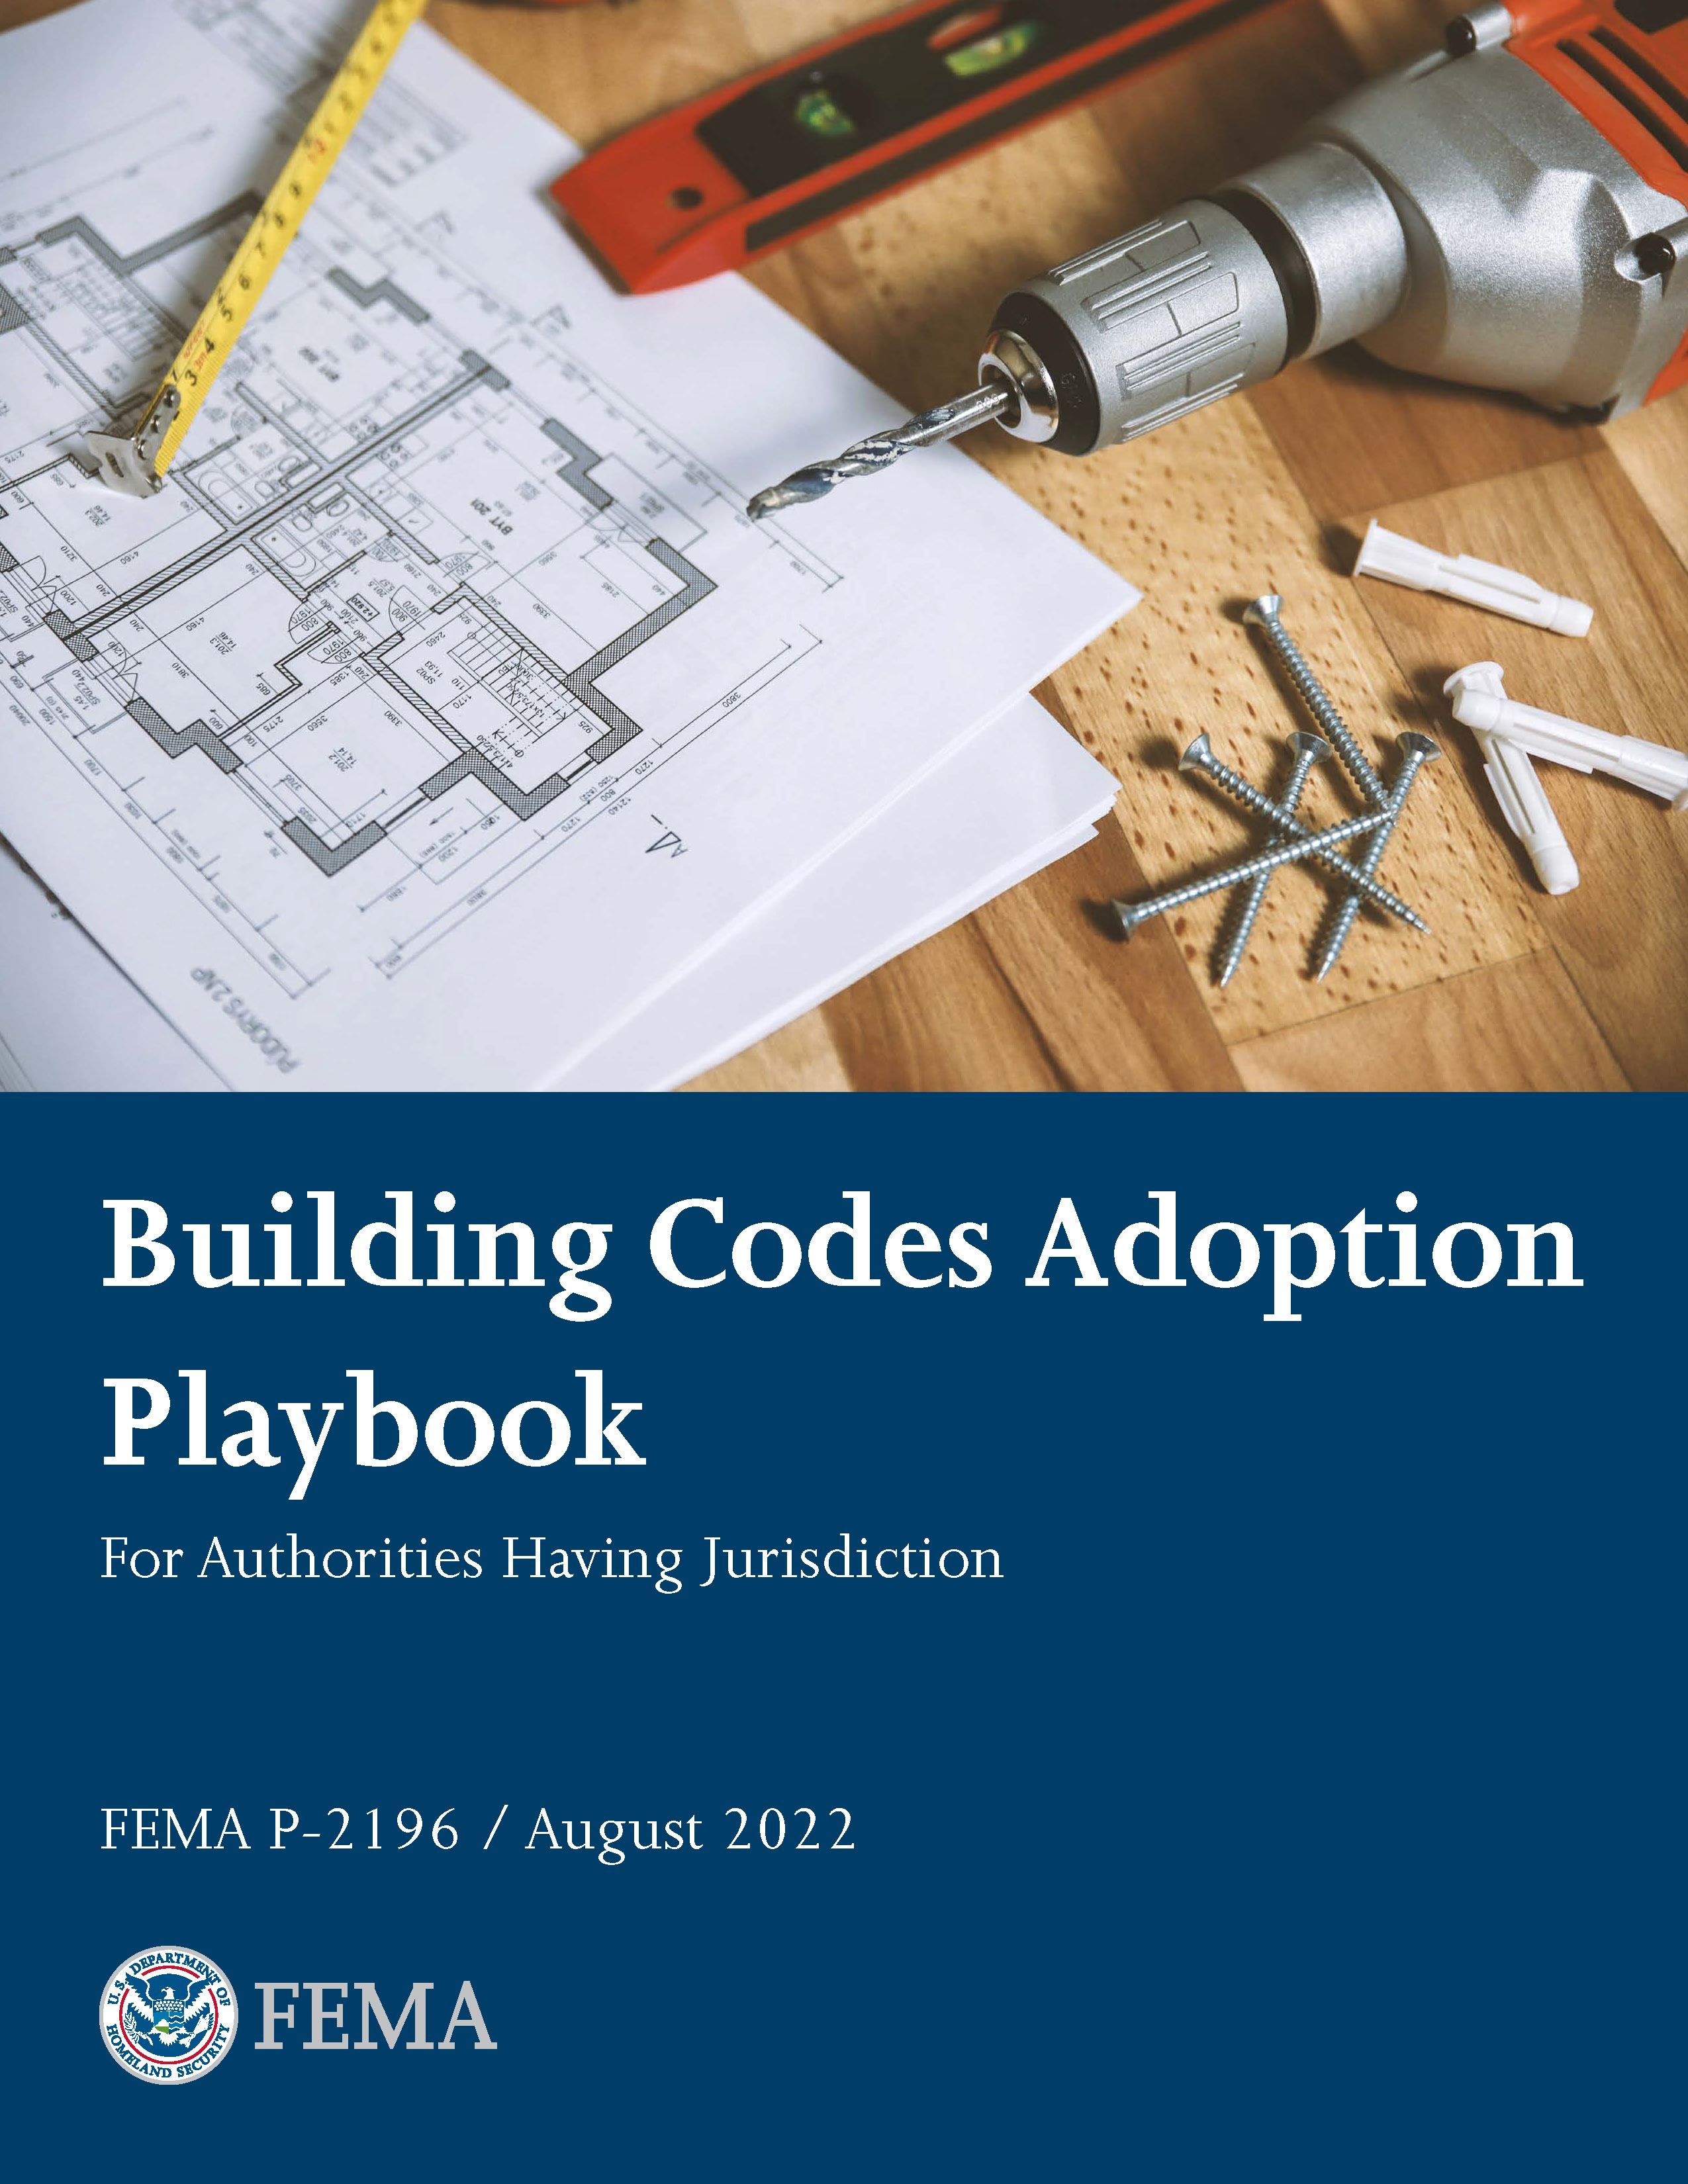 Top half of the image shows blueprints and construction tools. Text in the bottom half reads "Building Codes Adoption Playbook for Authorities having jurisdiction", FEMA P-2196/August 2022.